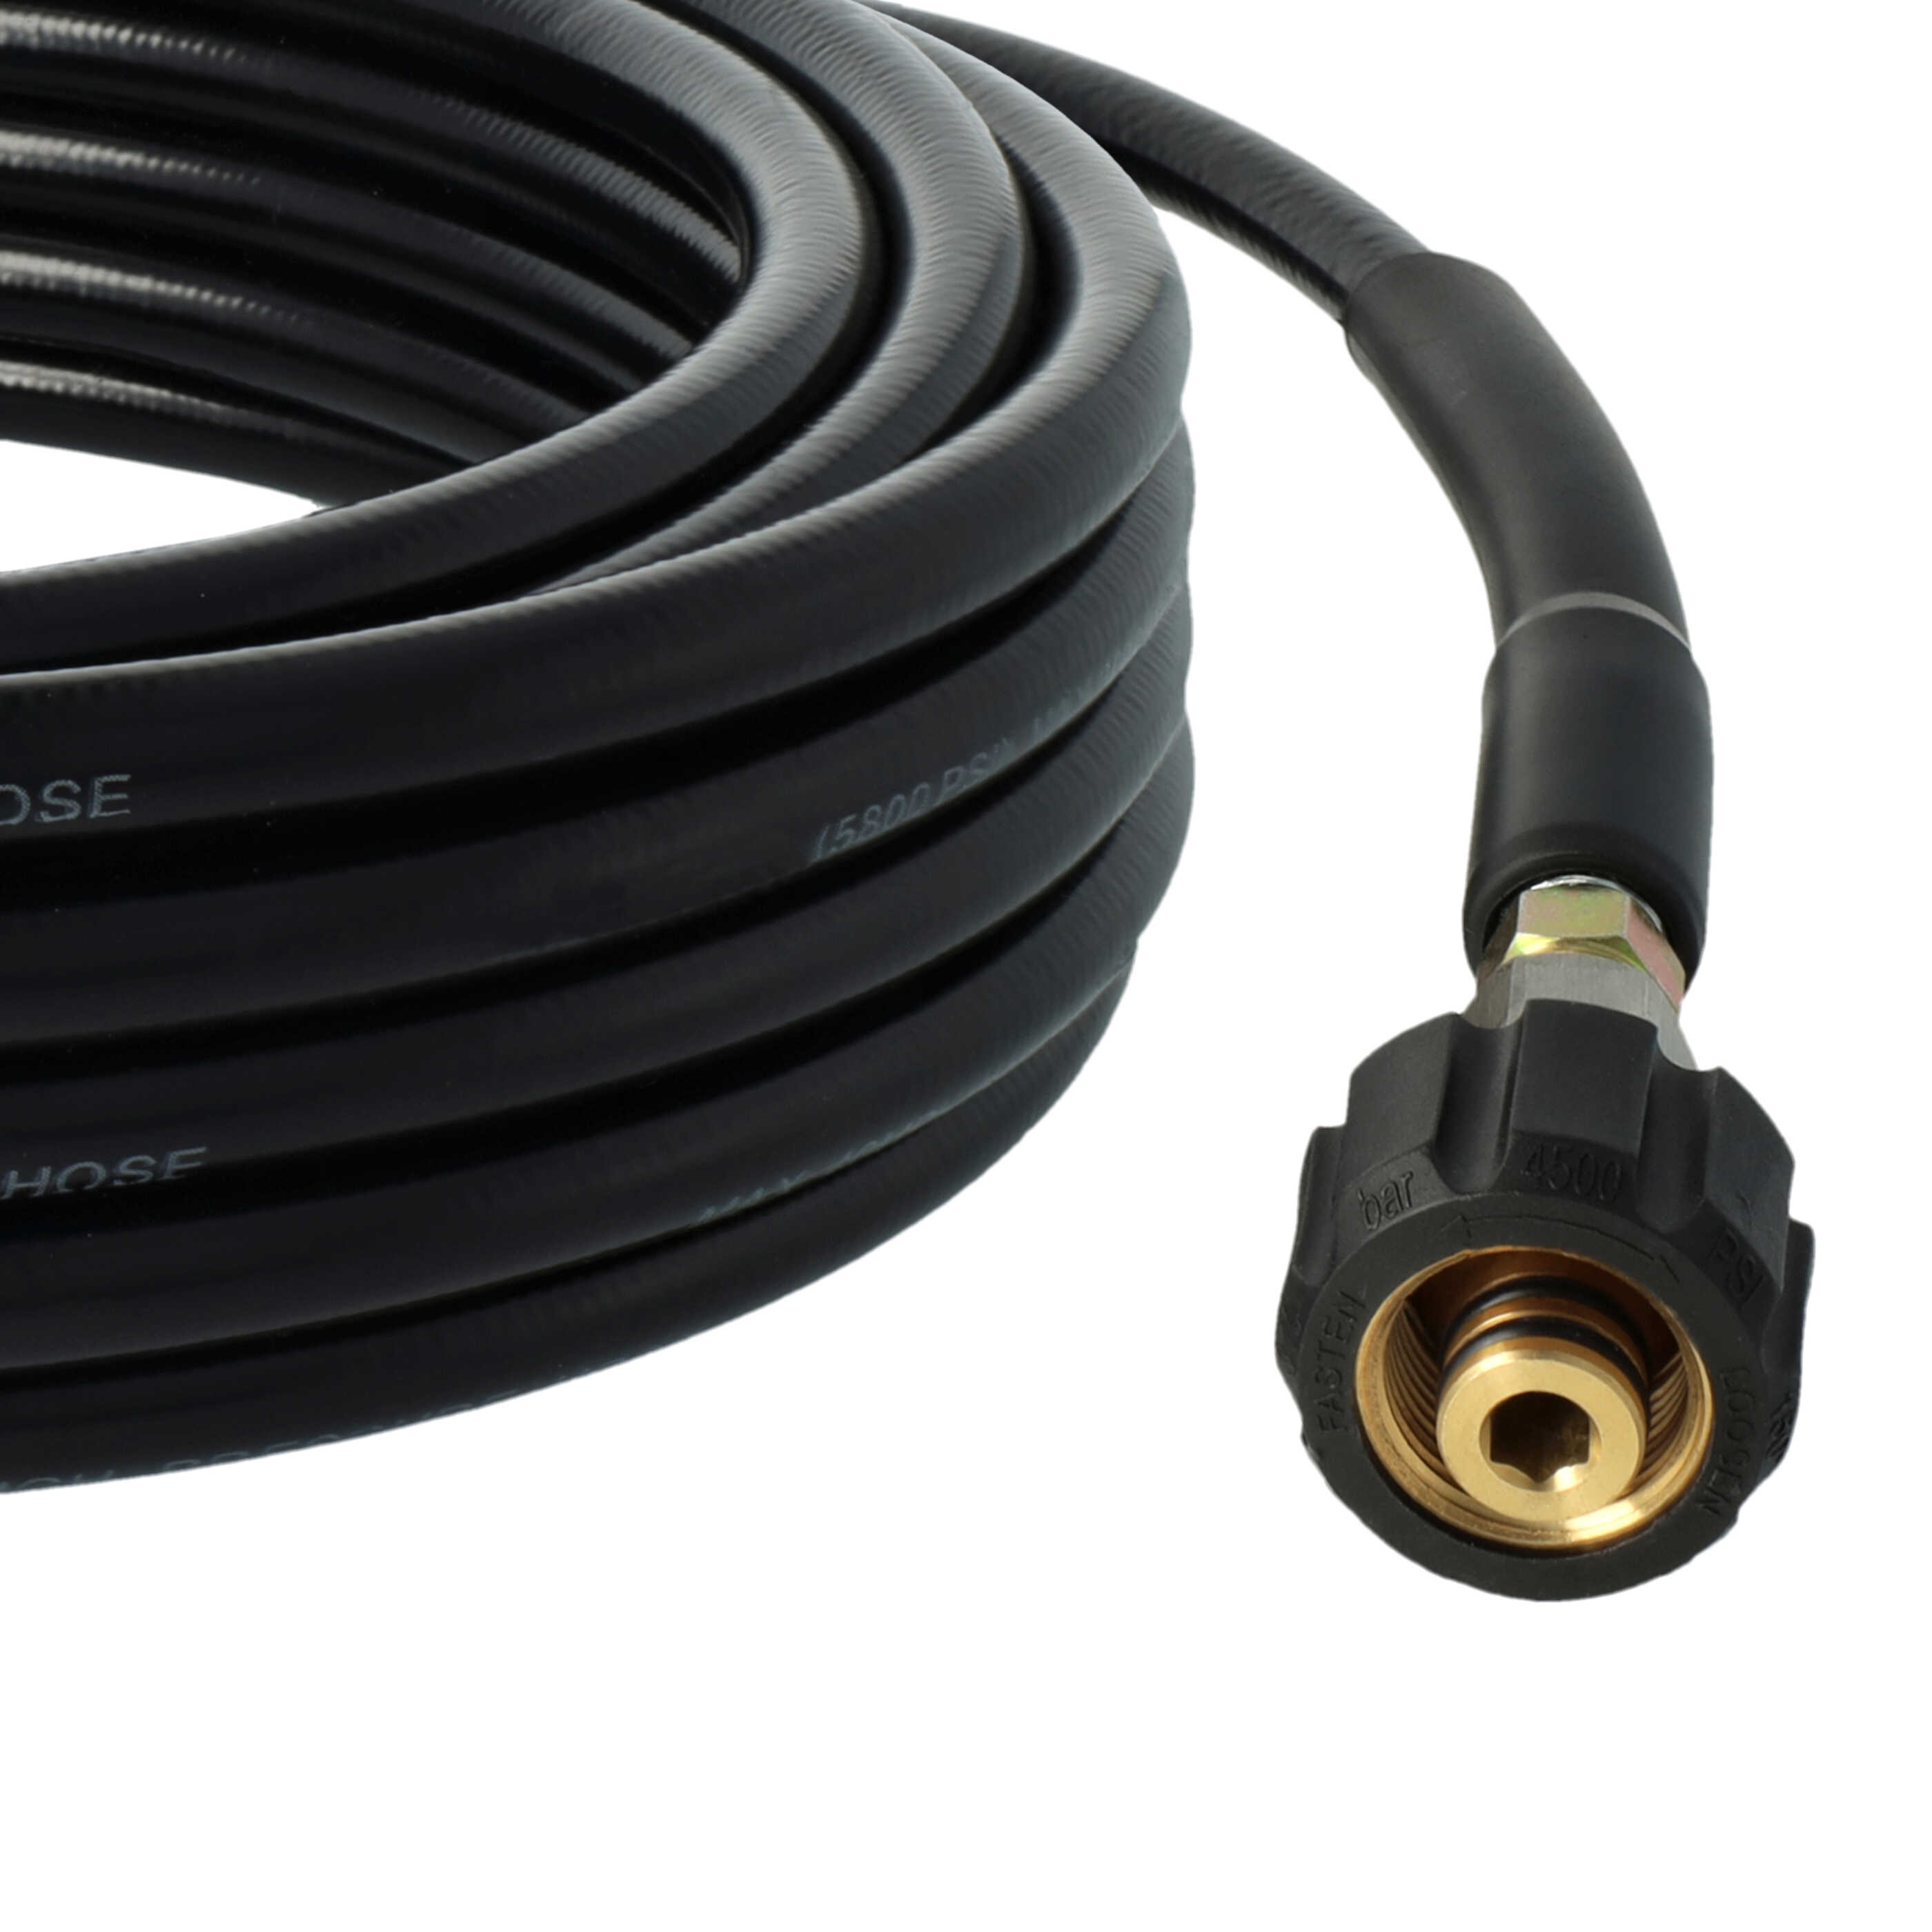 vhbw 10 m Extension Hose High-Pressure Cleaner with M22 x 1.5 Threaded Connection Black